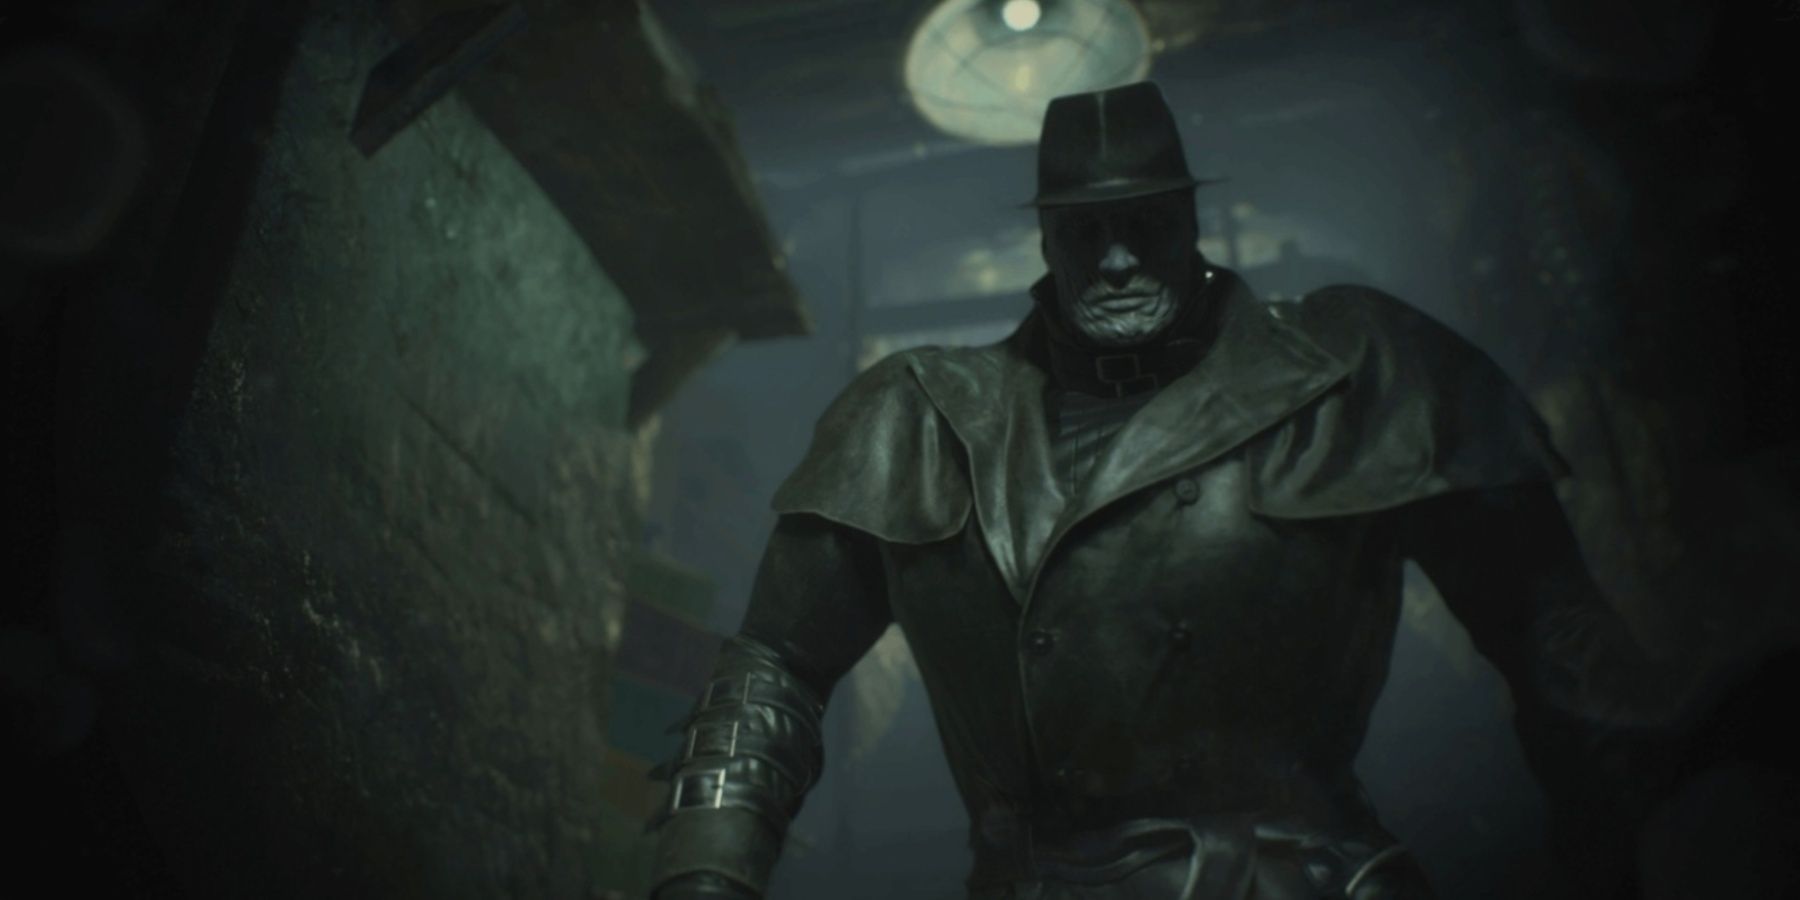 Mr X standing ominously in the dark in Resident Evil 2 remake